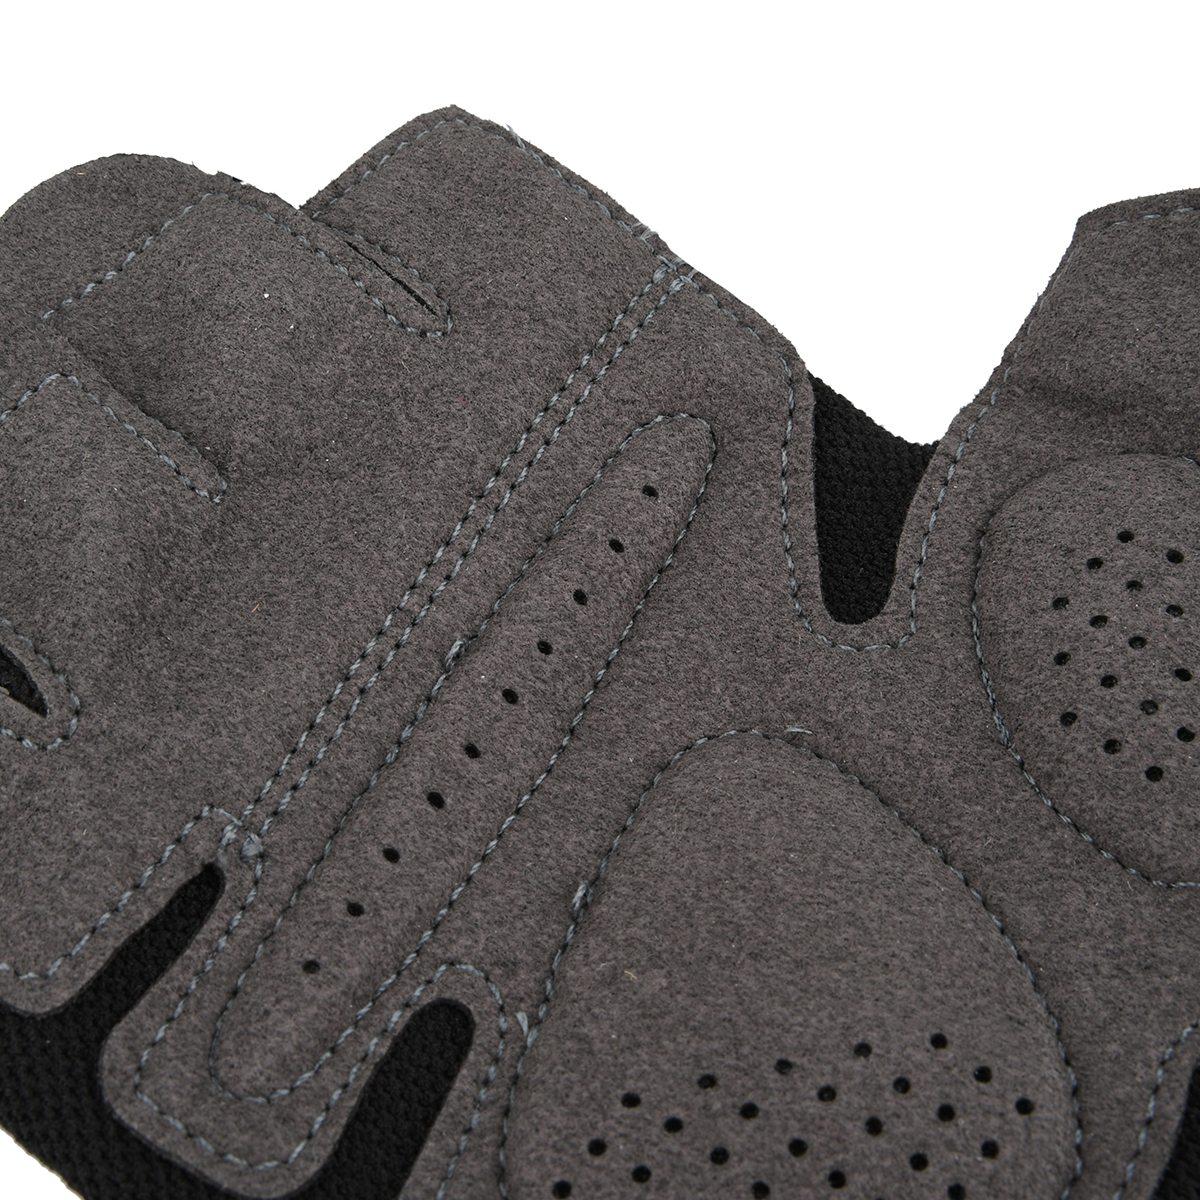 Guantes Nike Extreme Fitness,  image number null